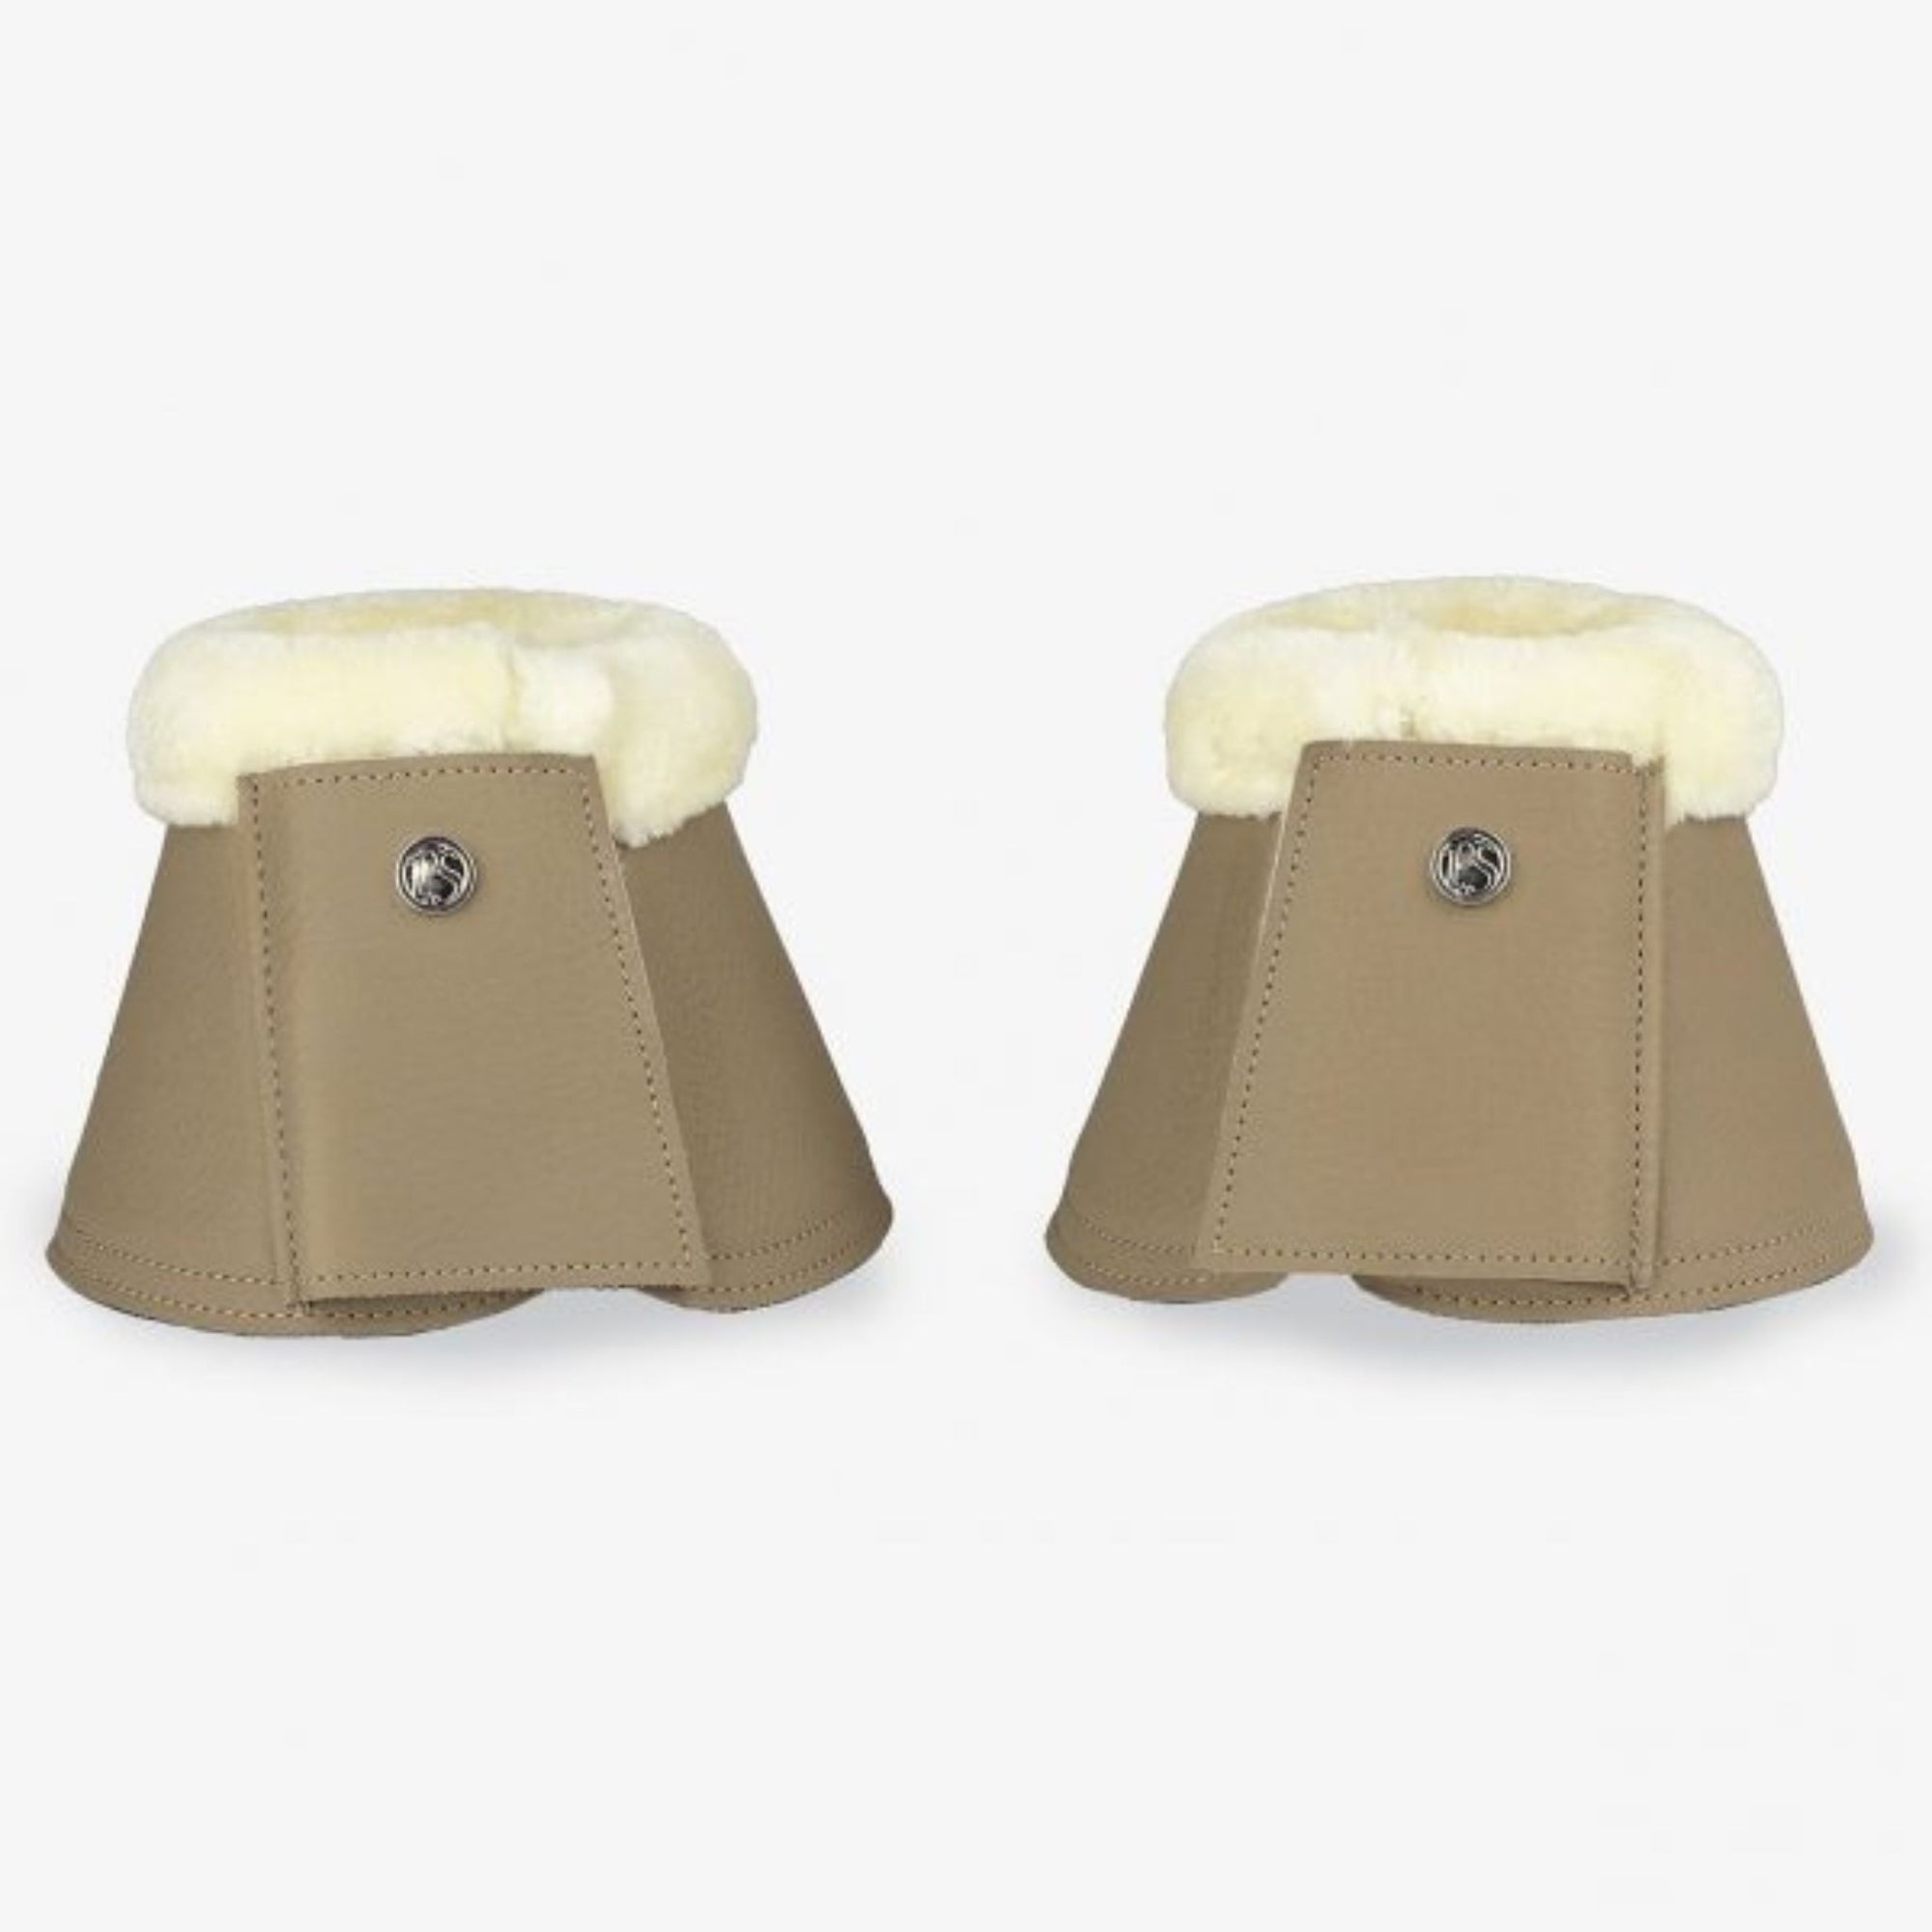 Sand coloured bell boots lined white faux fur.